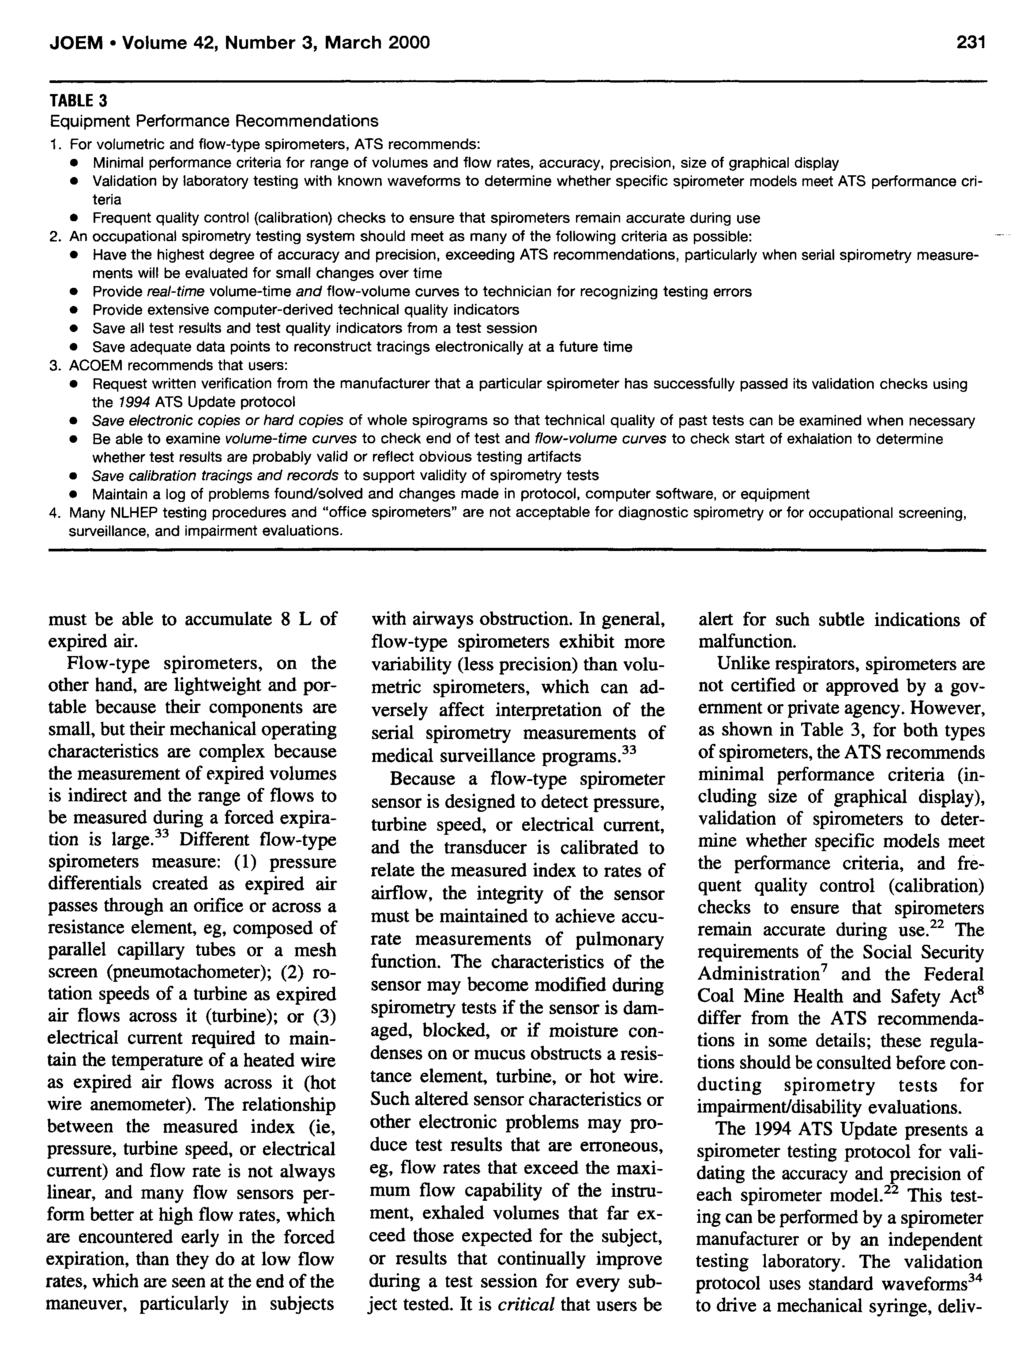 JOEM Volume 42, Number 3, March 2000 231 TABLE 3 Equipment Performance Recommendations 1.